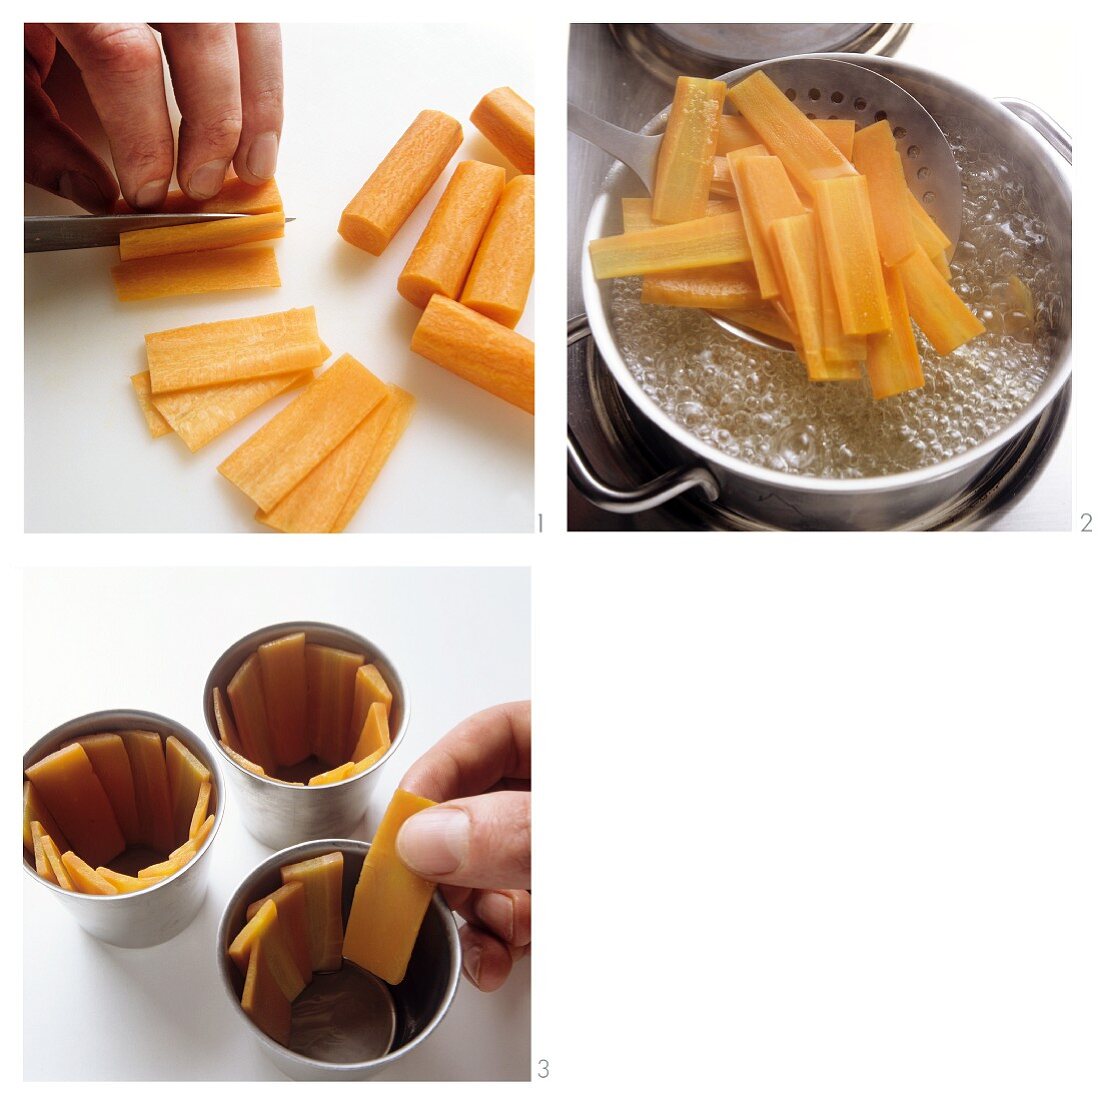 Cutting and cooking carrots and putting into timbale moulds